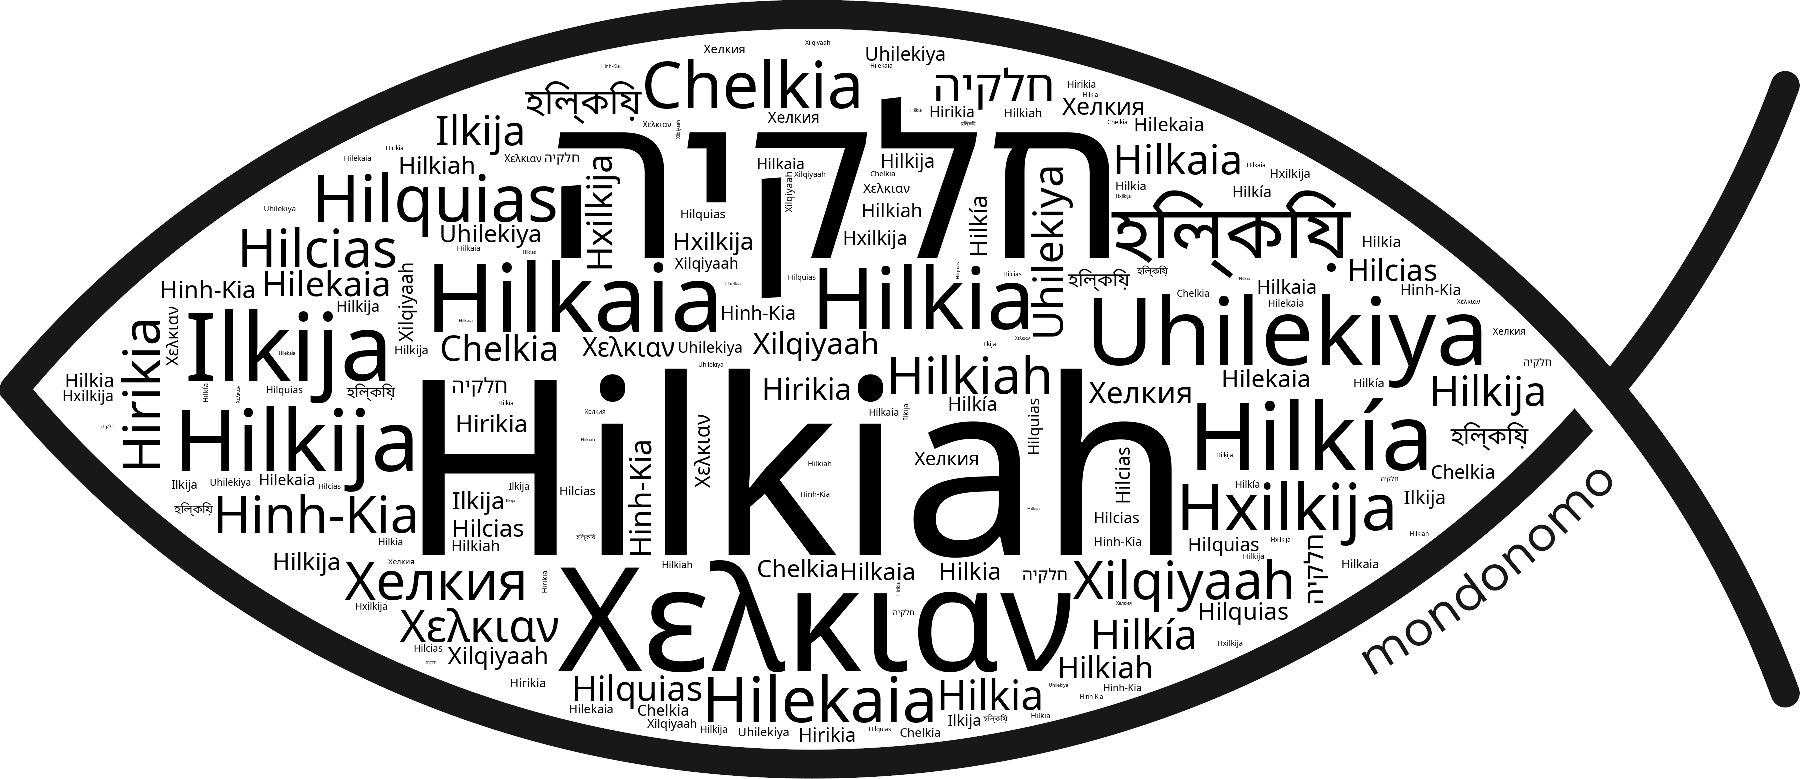 Name Hilkiah in the world's Bibles